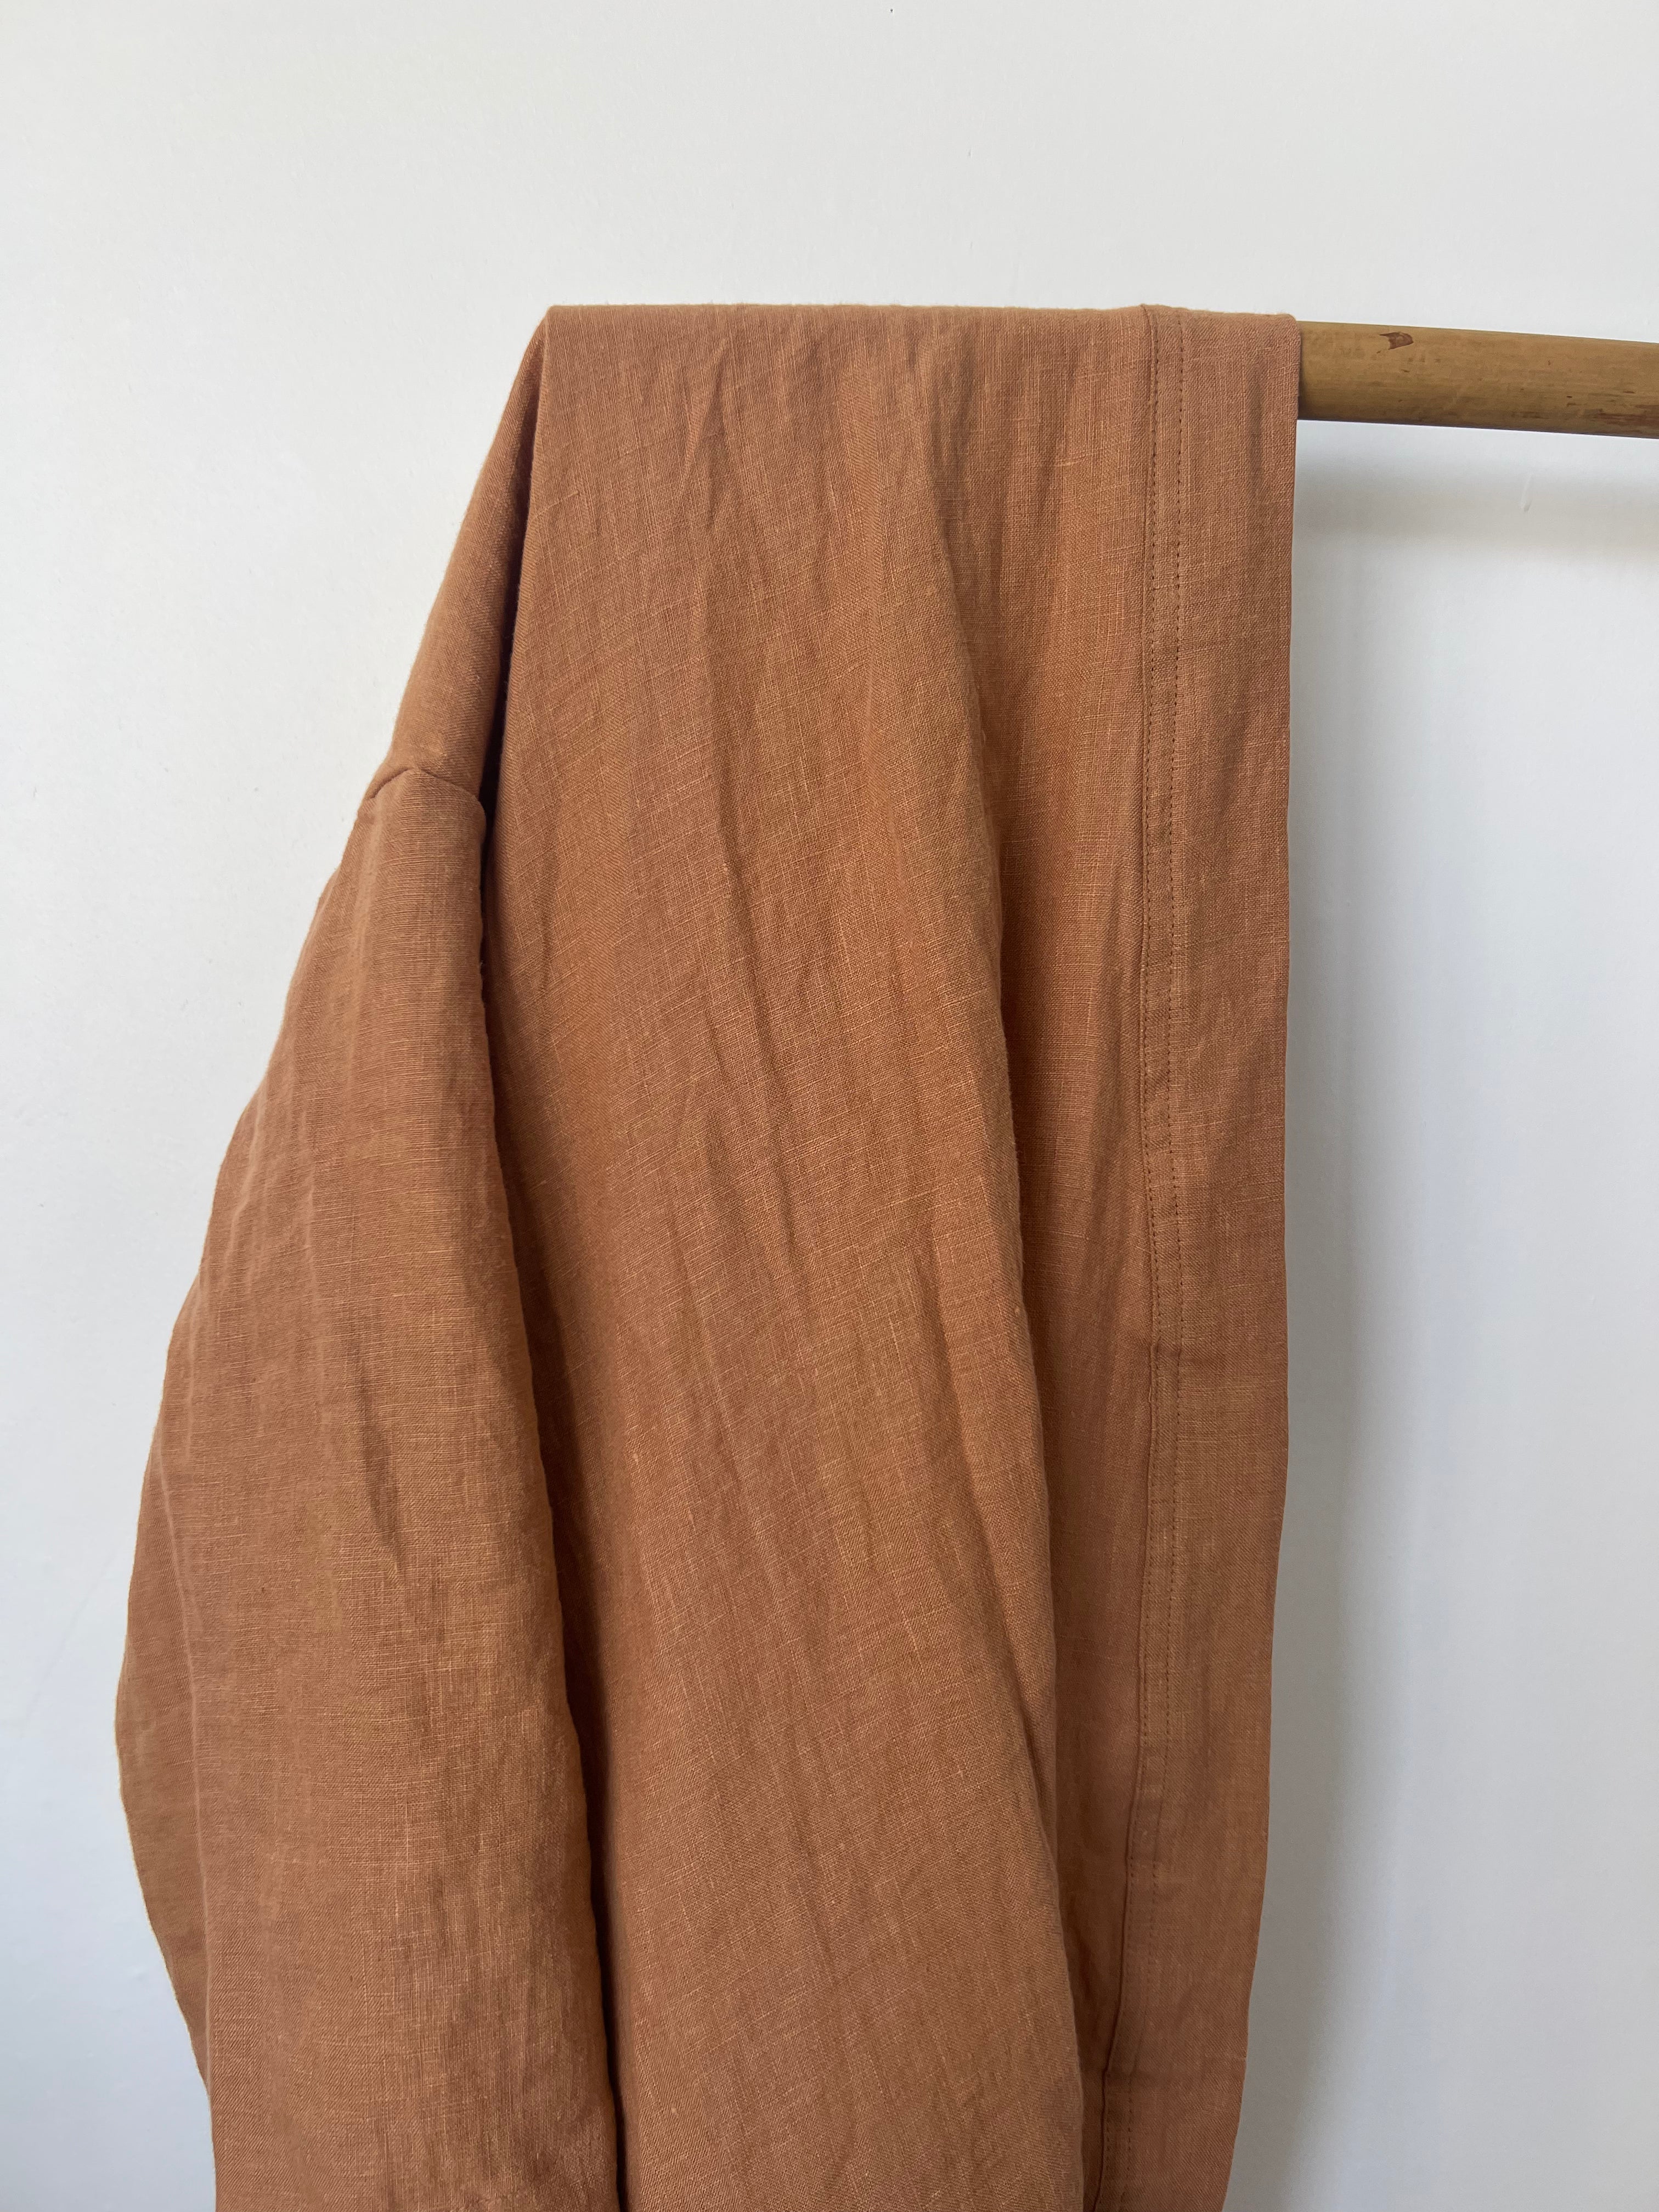 Long Robe. Toffee